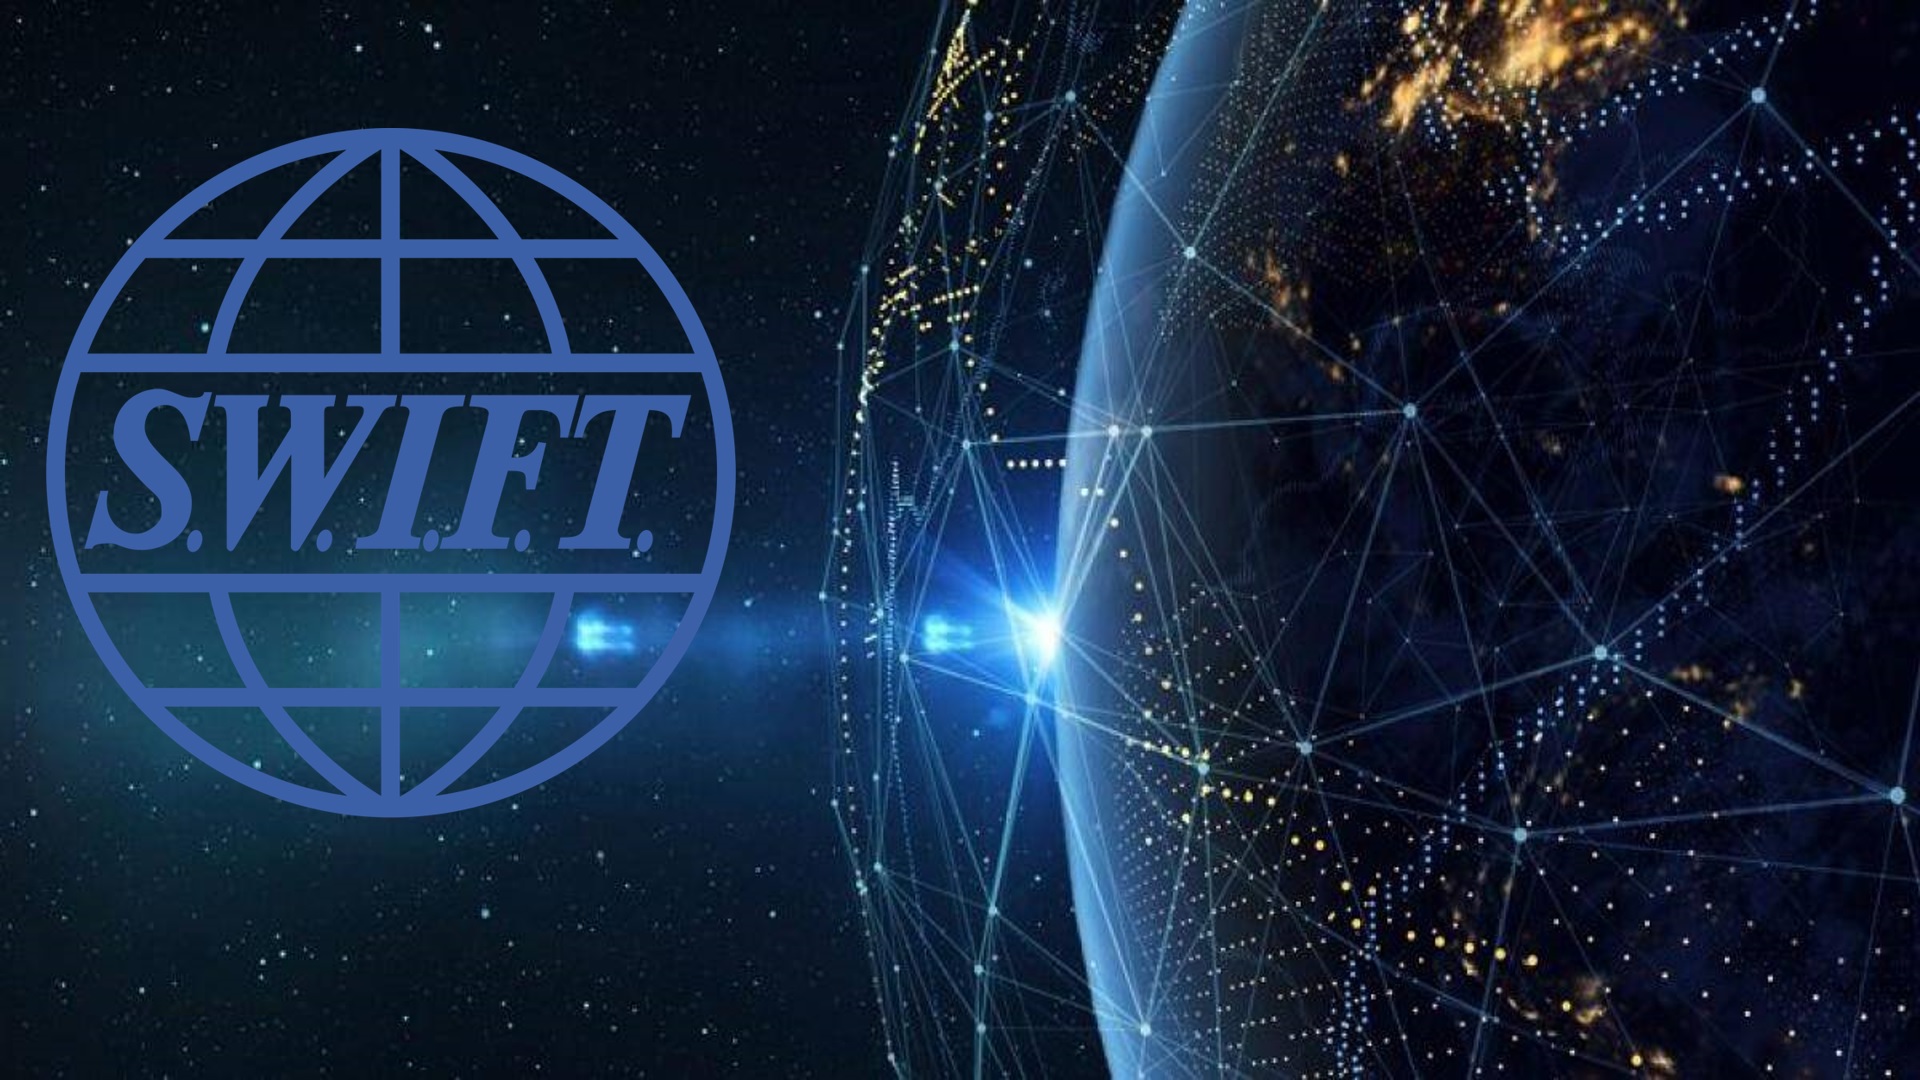 Giant payment service provider ‘SWIFT’ acknowledges that digital assets are a key component of financial innovation